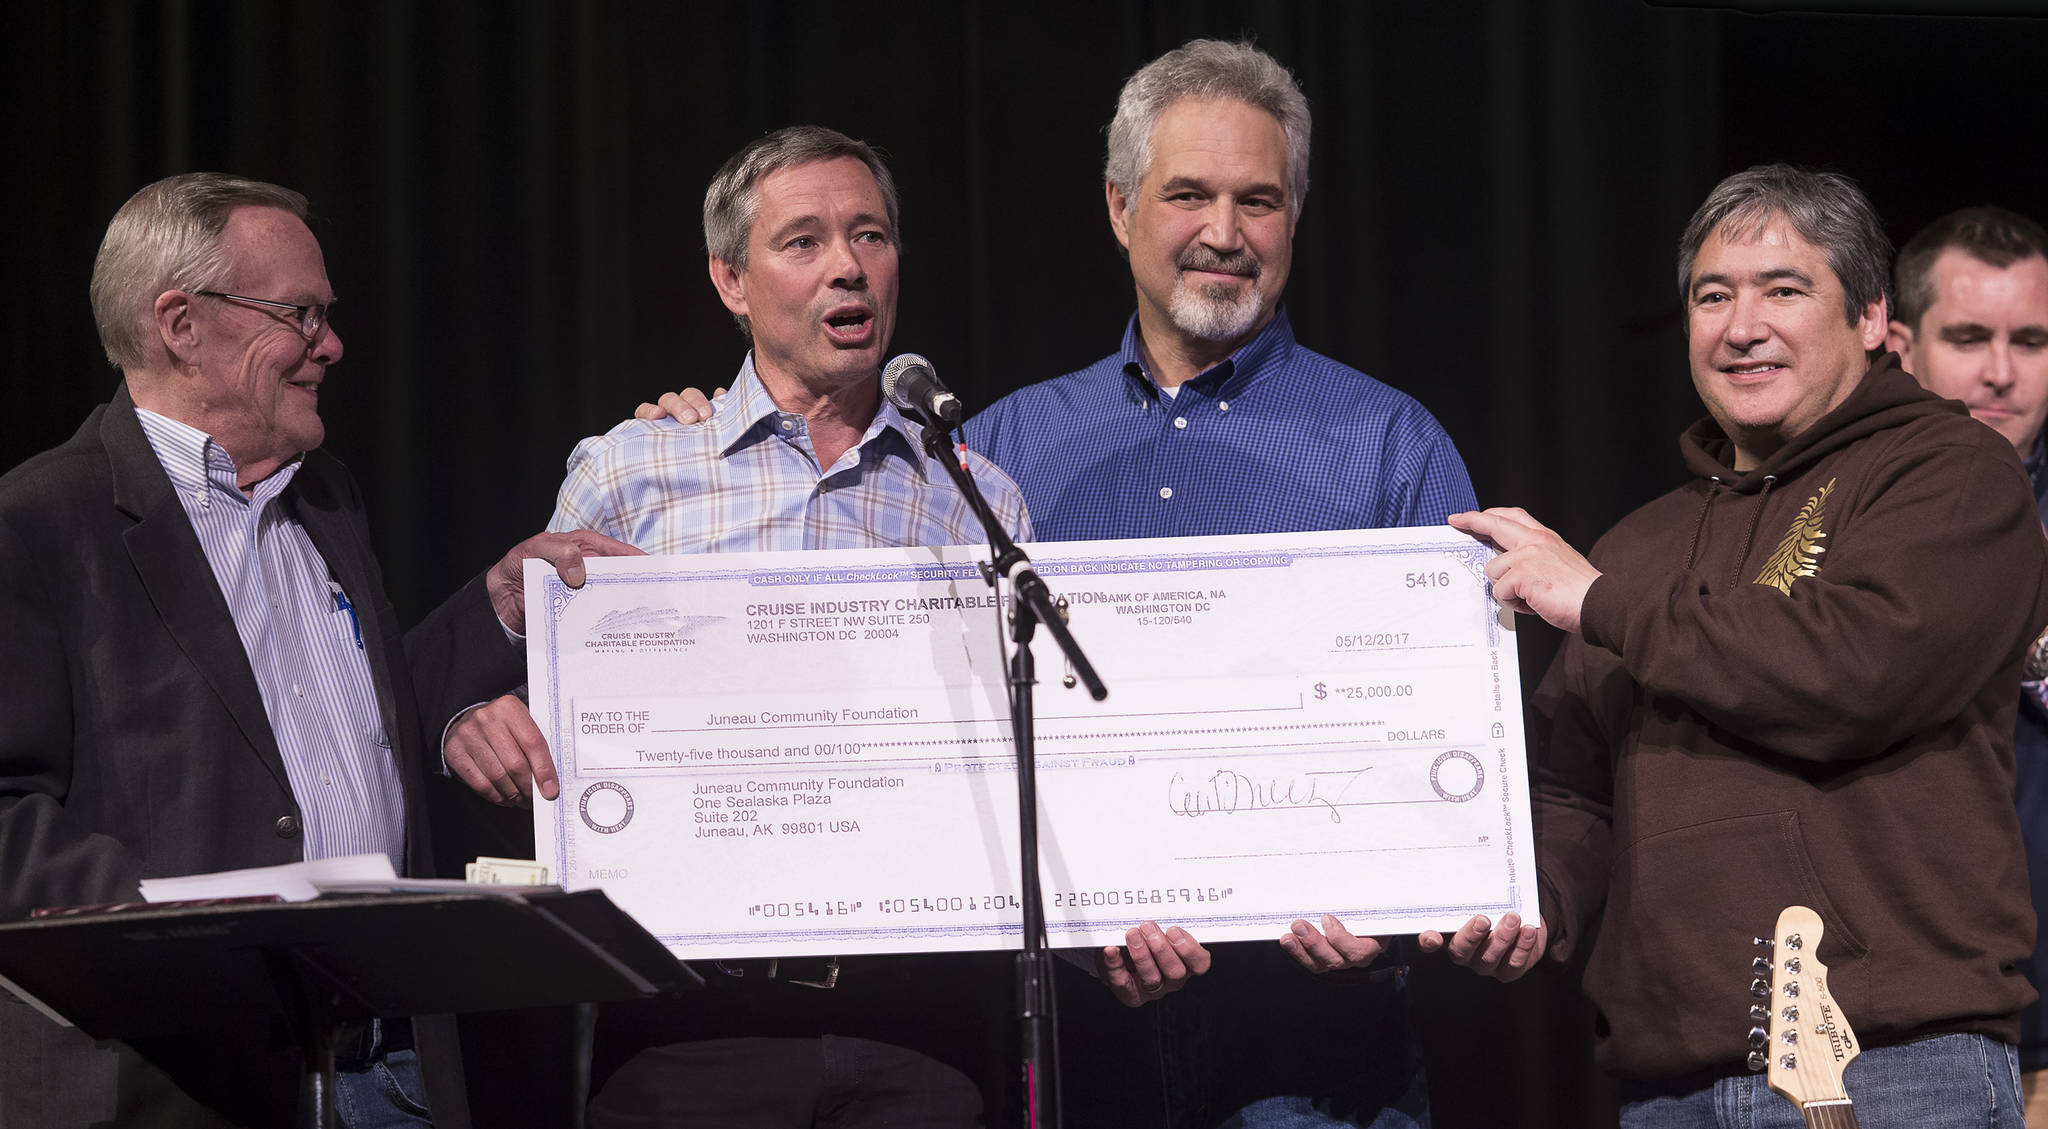 Cruise Lines International Association Alaska President John Binkley, second from left, presents a check for $25,000 to the Juneau Playground Fund from the Cruise Industry Charitable Foundation on Monday, May 15, 2017, during a fundraiser for the fire-destroyed Project Playground in Juneau, Alaska. With Binkley are Sen. Dennis Egan, D-Juneau, left, Senate President Pete Kelly, R-Fairbanks, and Rep. Sam Kito, D-Juneau, right. (Michael Penn | Juneau Empire)